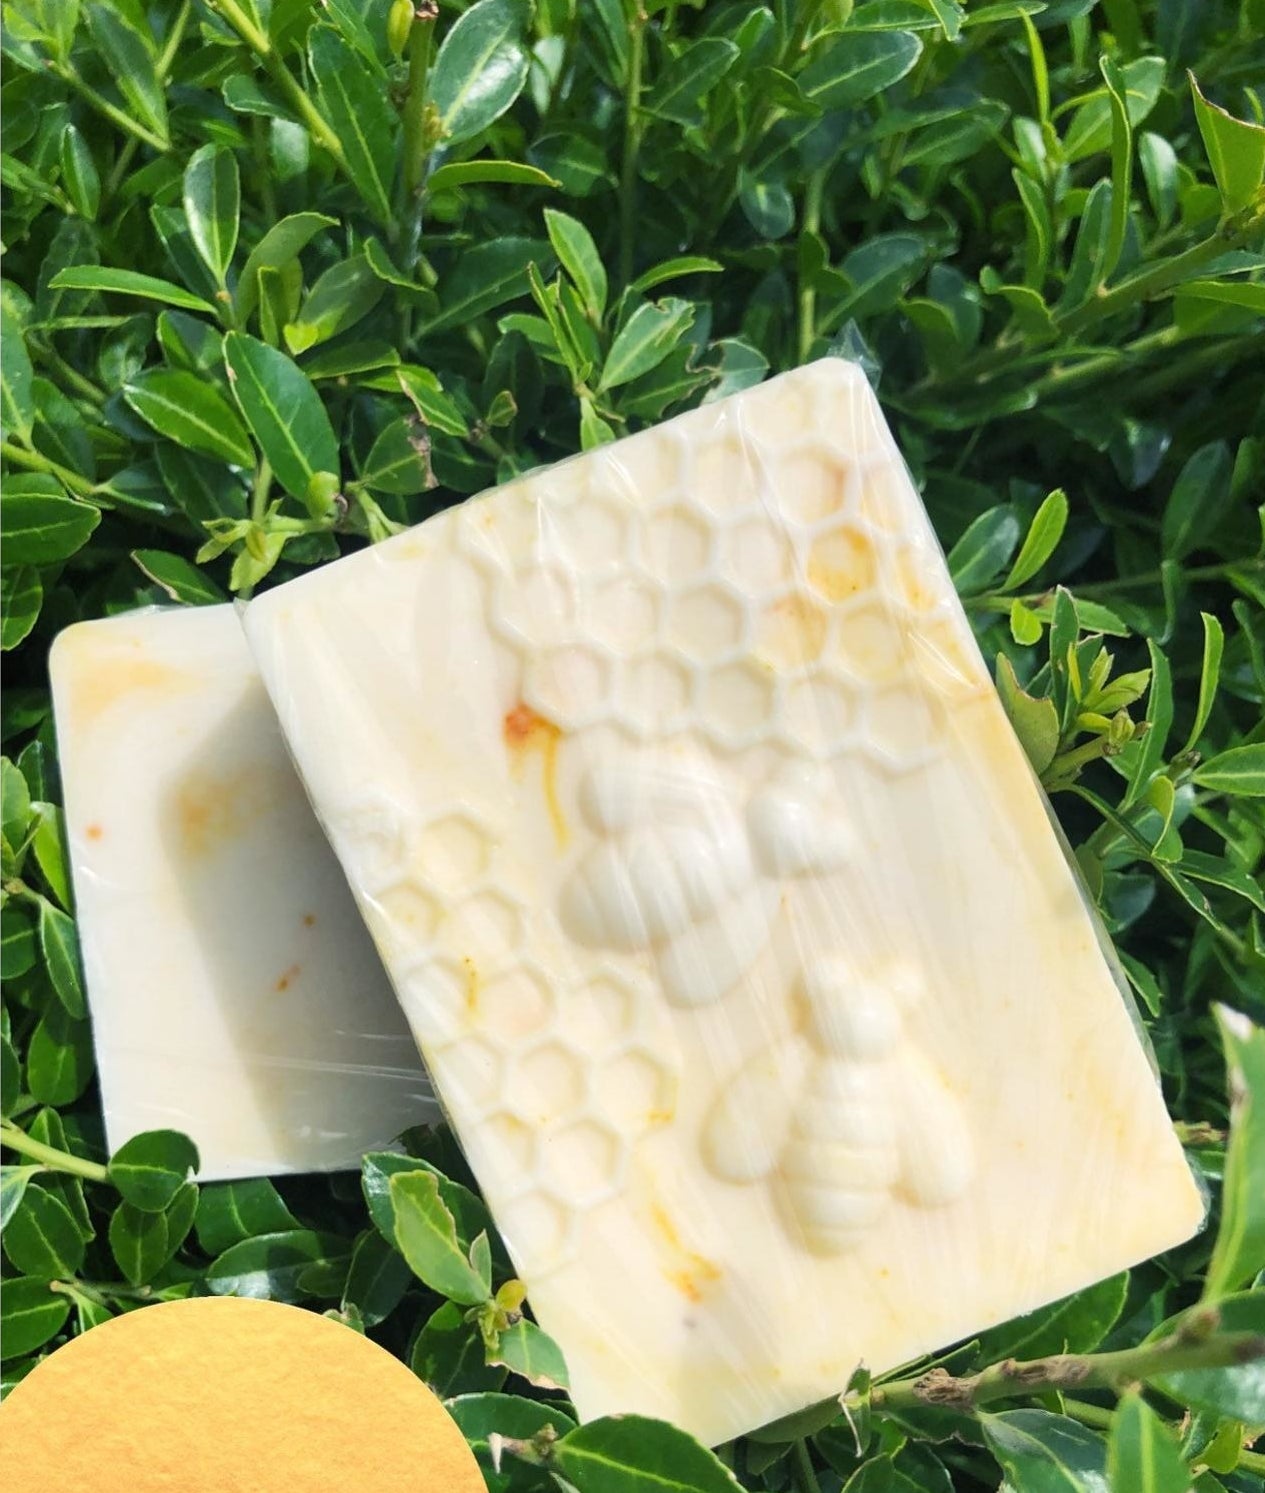 A white and yellow streaked bar of soap imprinted with bees and honeycomb patterns 